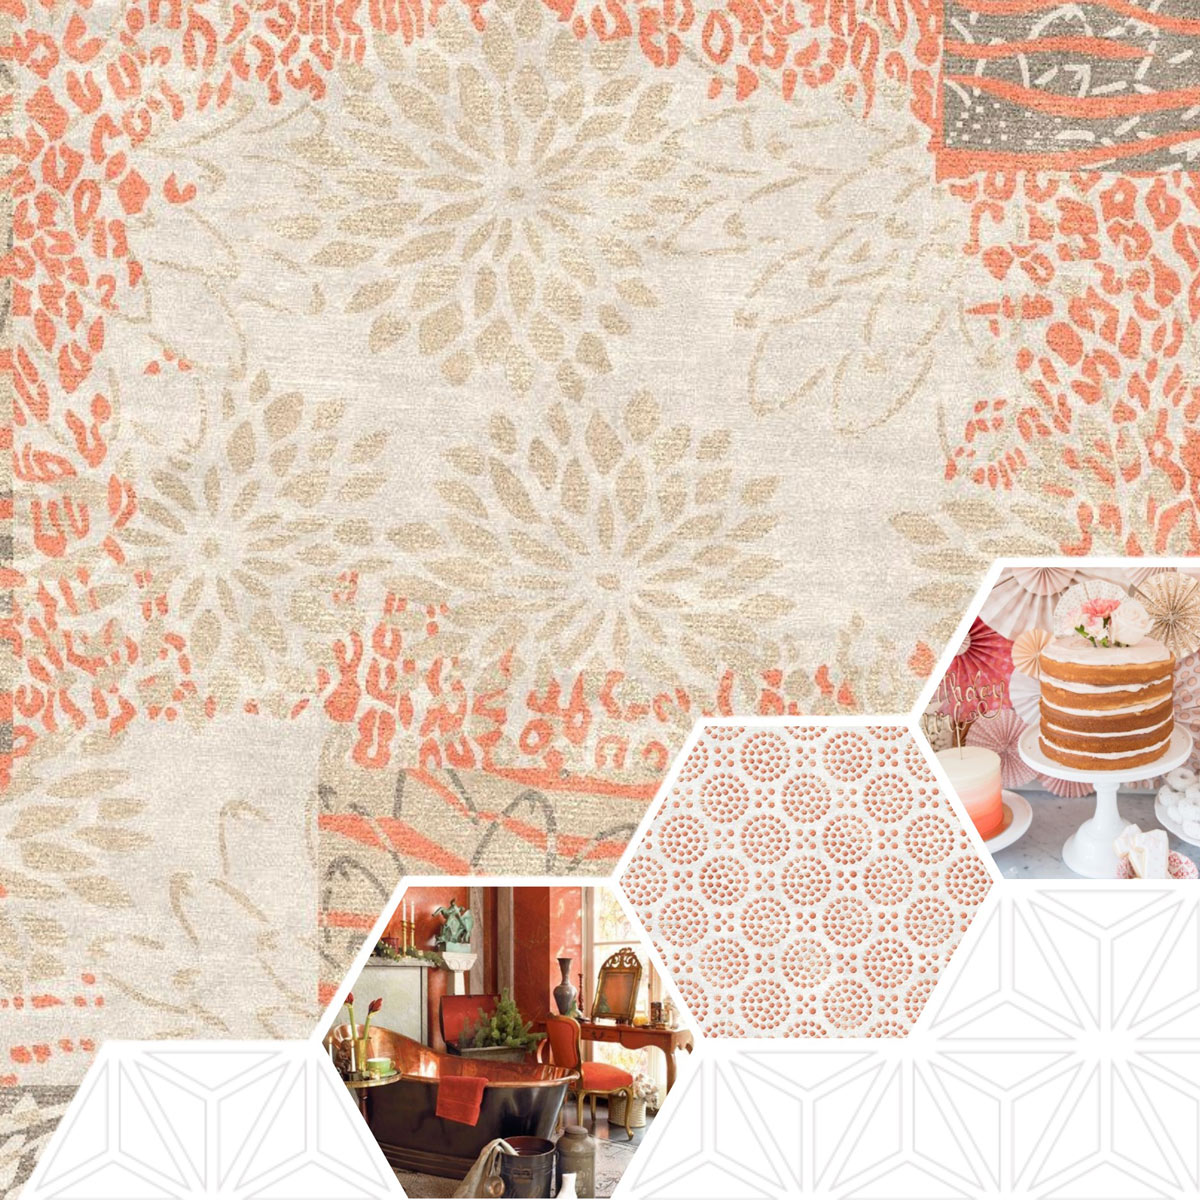 Living Coral Is the Color of the Year for 2019; Signature 16 Coral themed rug alongside of elegant coral themed bathroom and set of birthday cakes (bathroom image from Nancy Worden Geisel - https://www.pinterest.com/pin/499618152386898659/?lp=true; cakes photo from www.karaspartyideas.com)